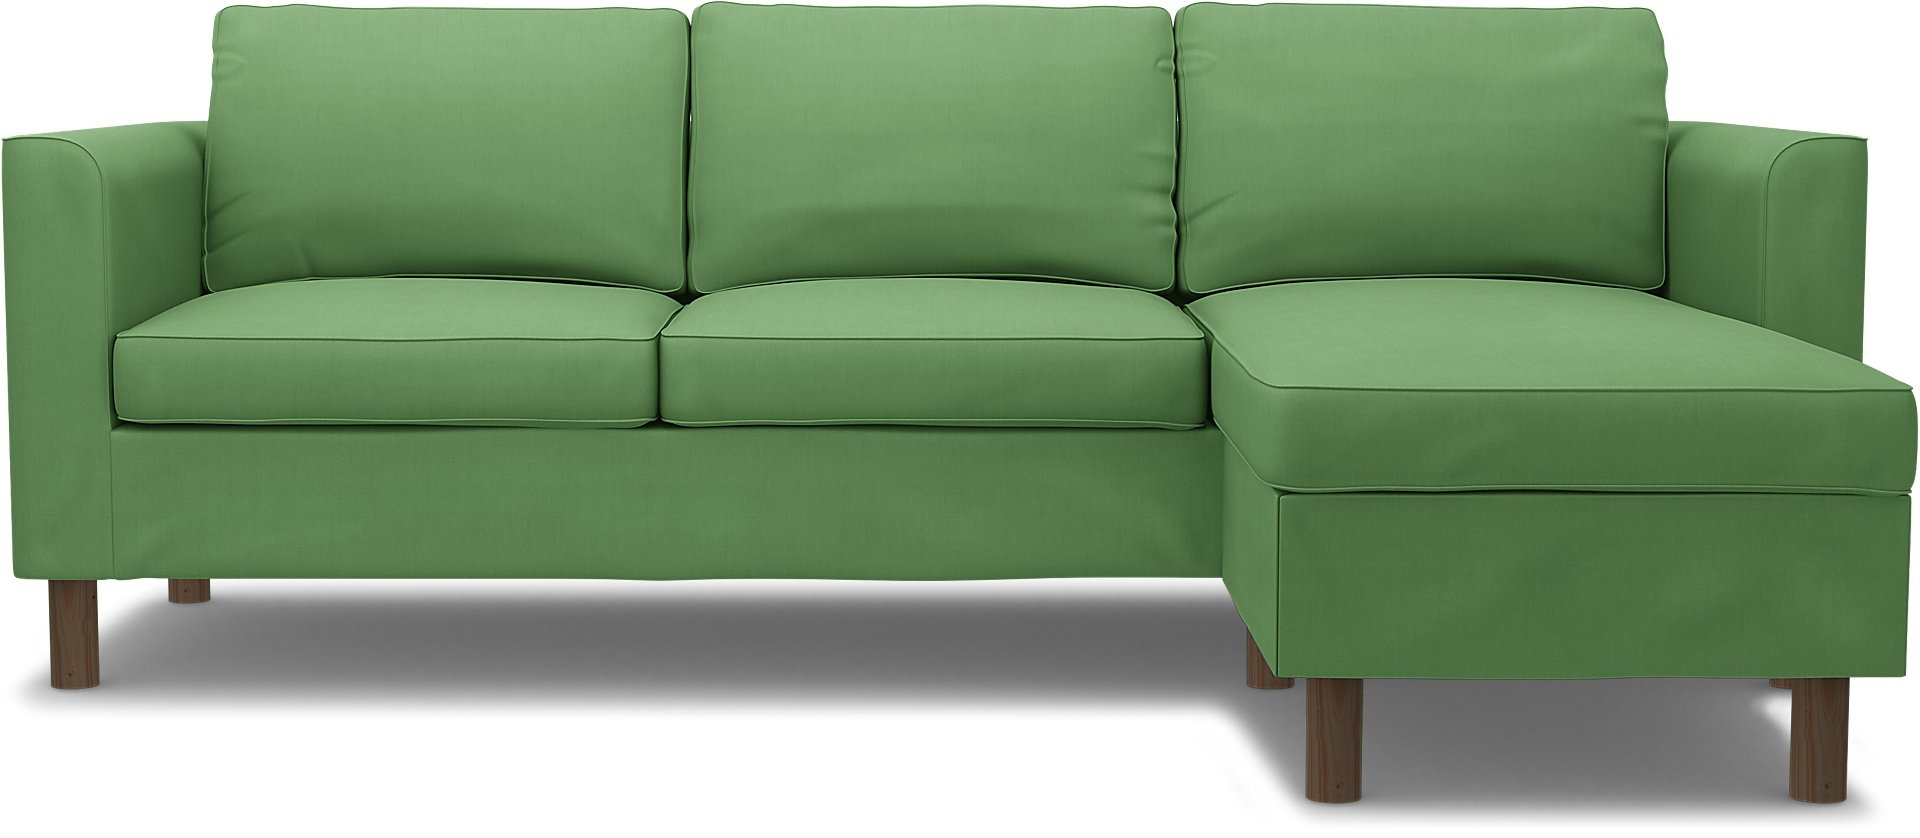 IKEA - Parup 3 Seater with chaise longue, Apple Green, Linen - Bemz